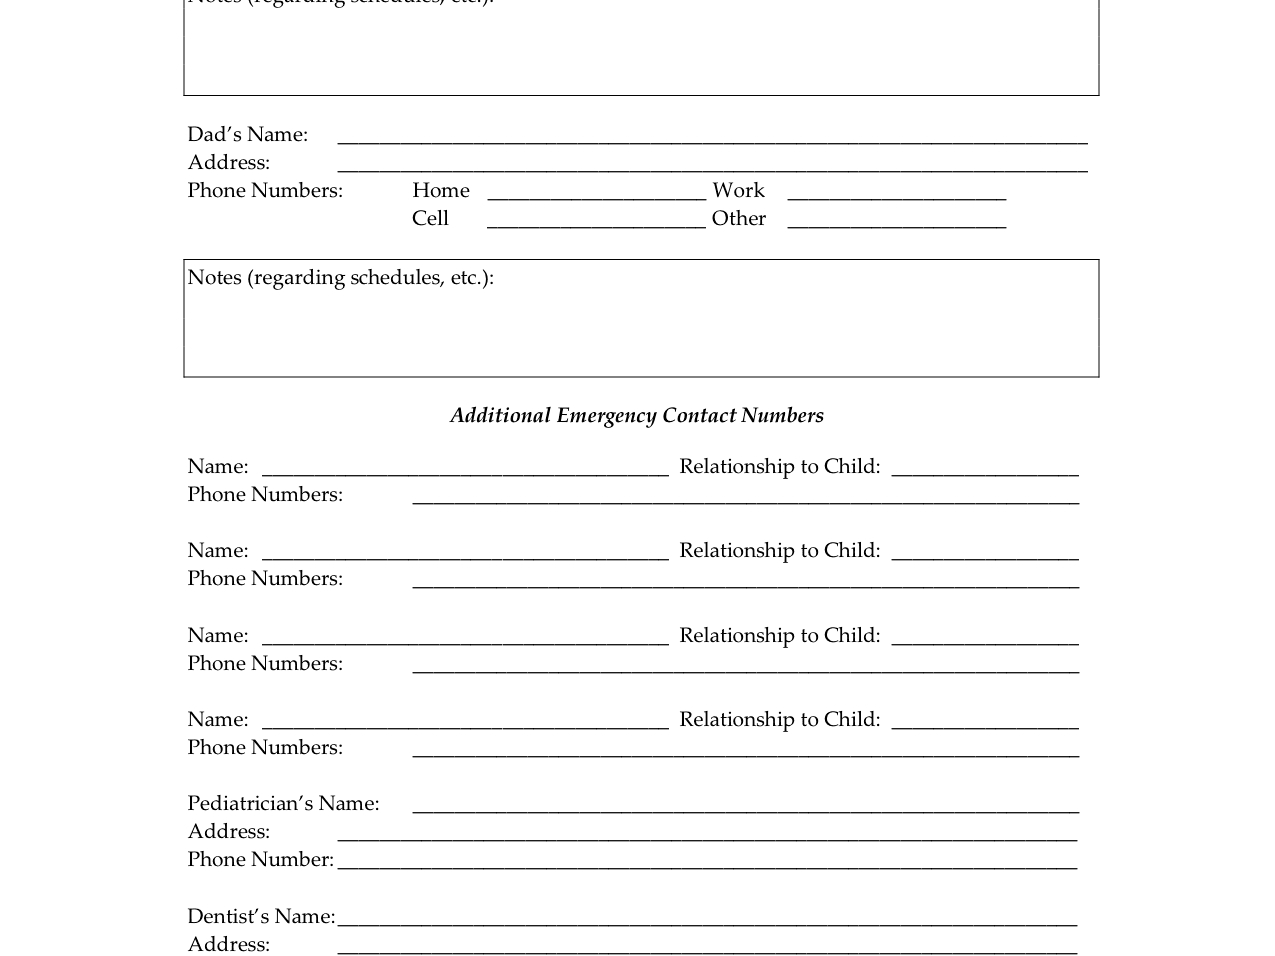 Child's Emergency Contact Form | Single Parent Families Throughout Emergency Contact Card Template